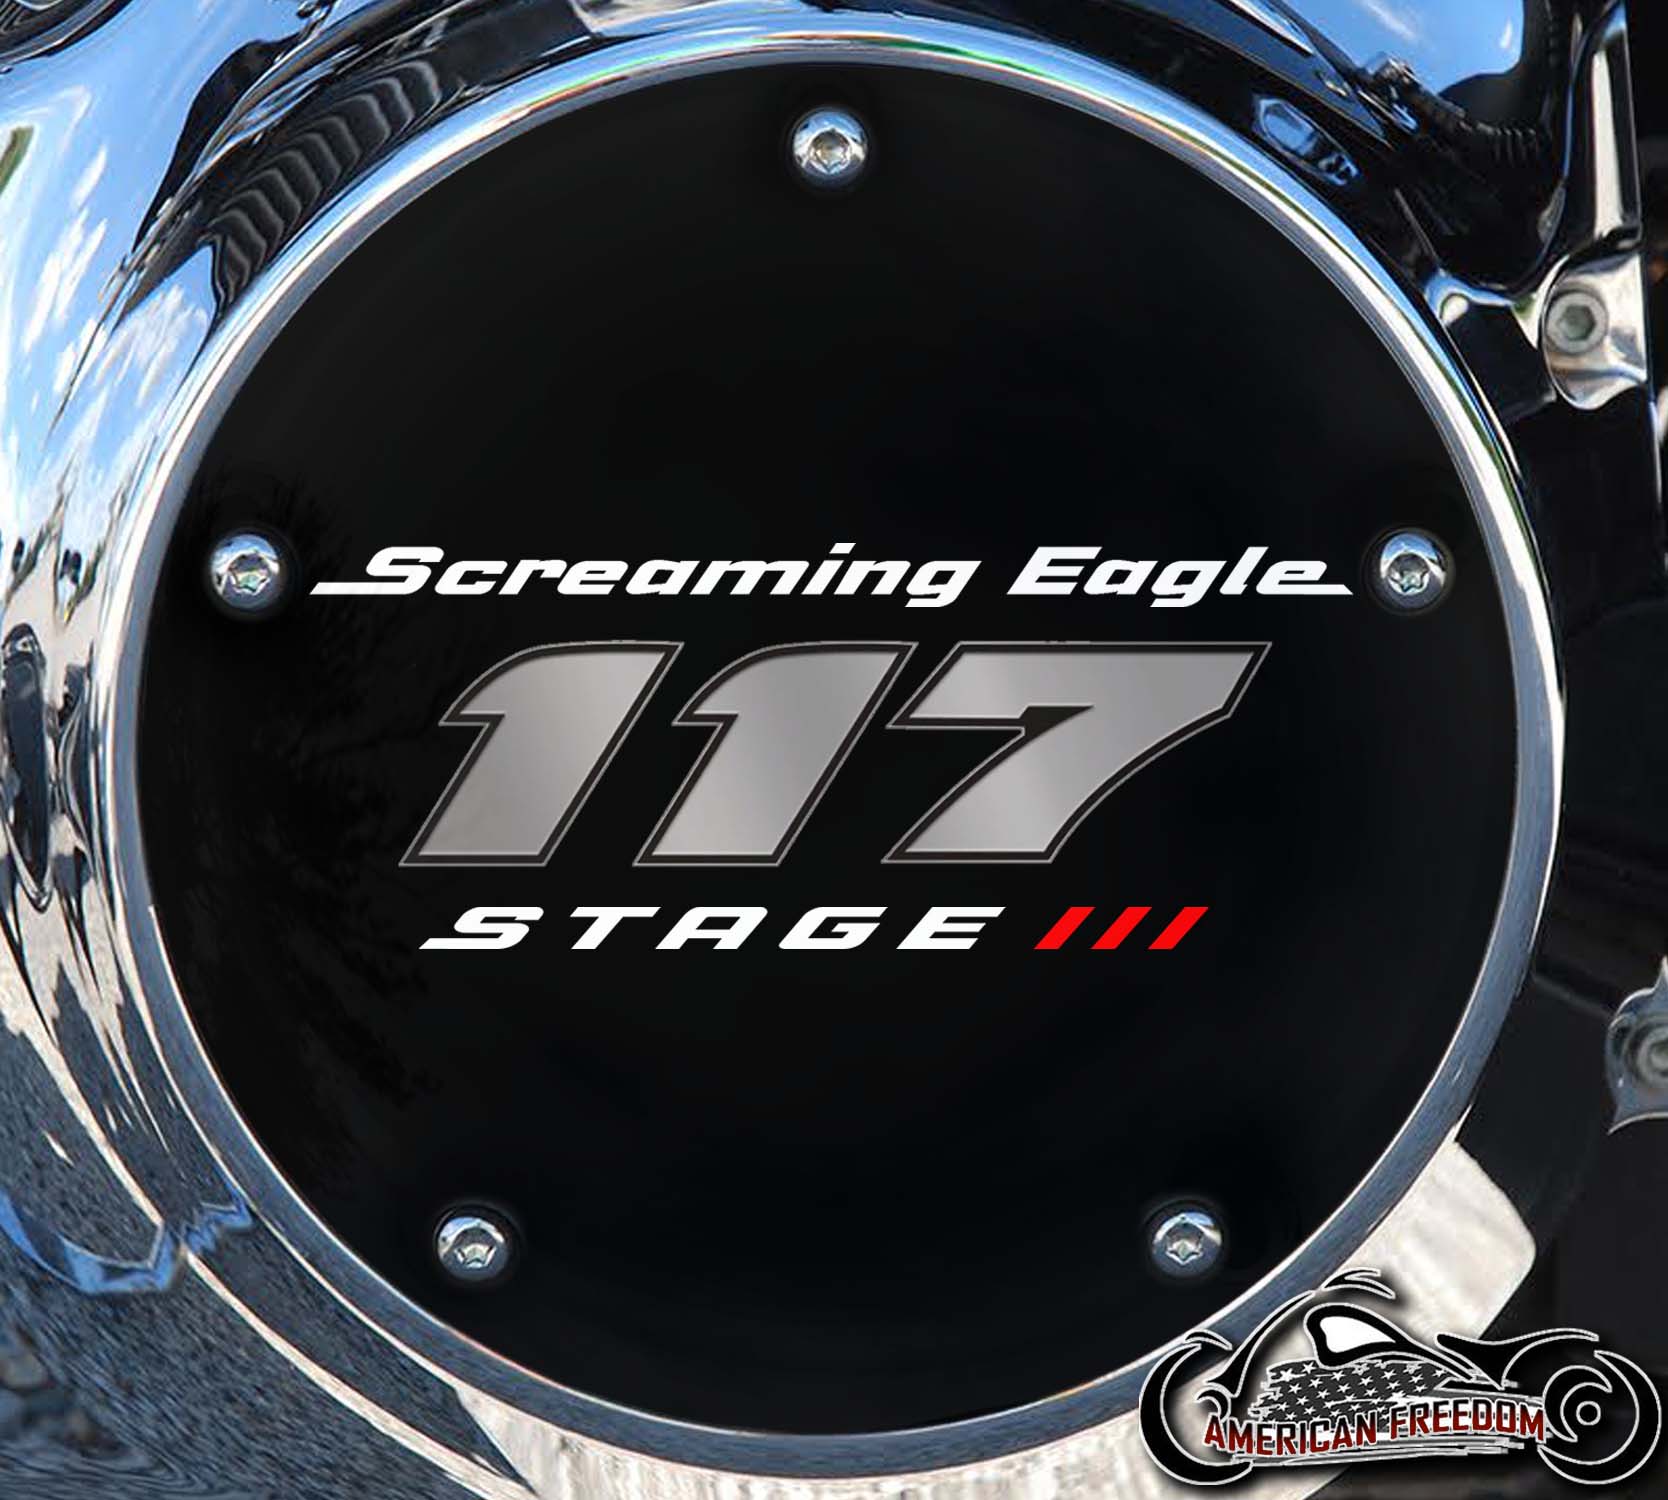 Screaming Eagle Stage III 117 Derby Cover